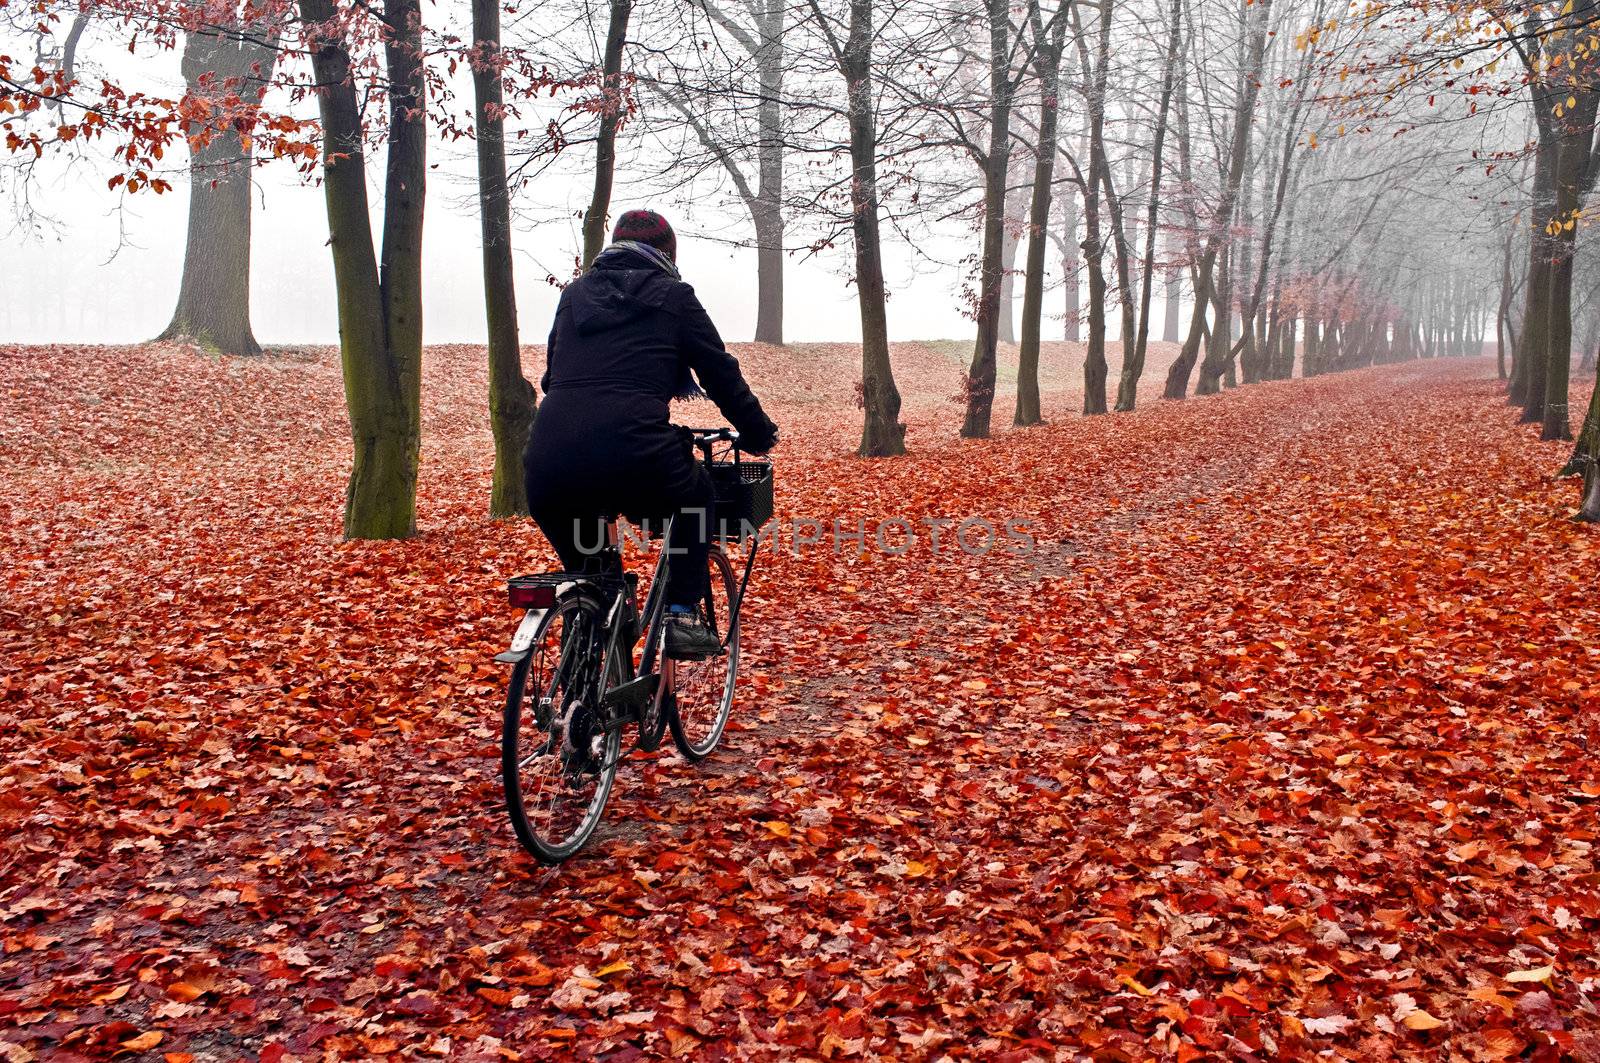 November fog in park with woman riding on bike